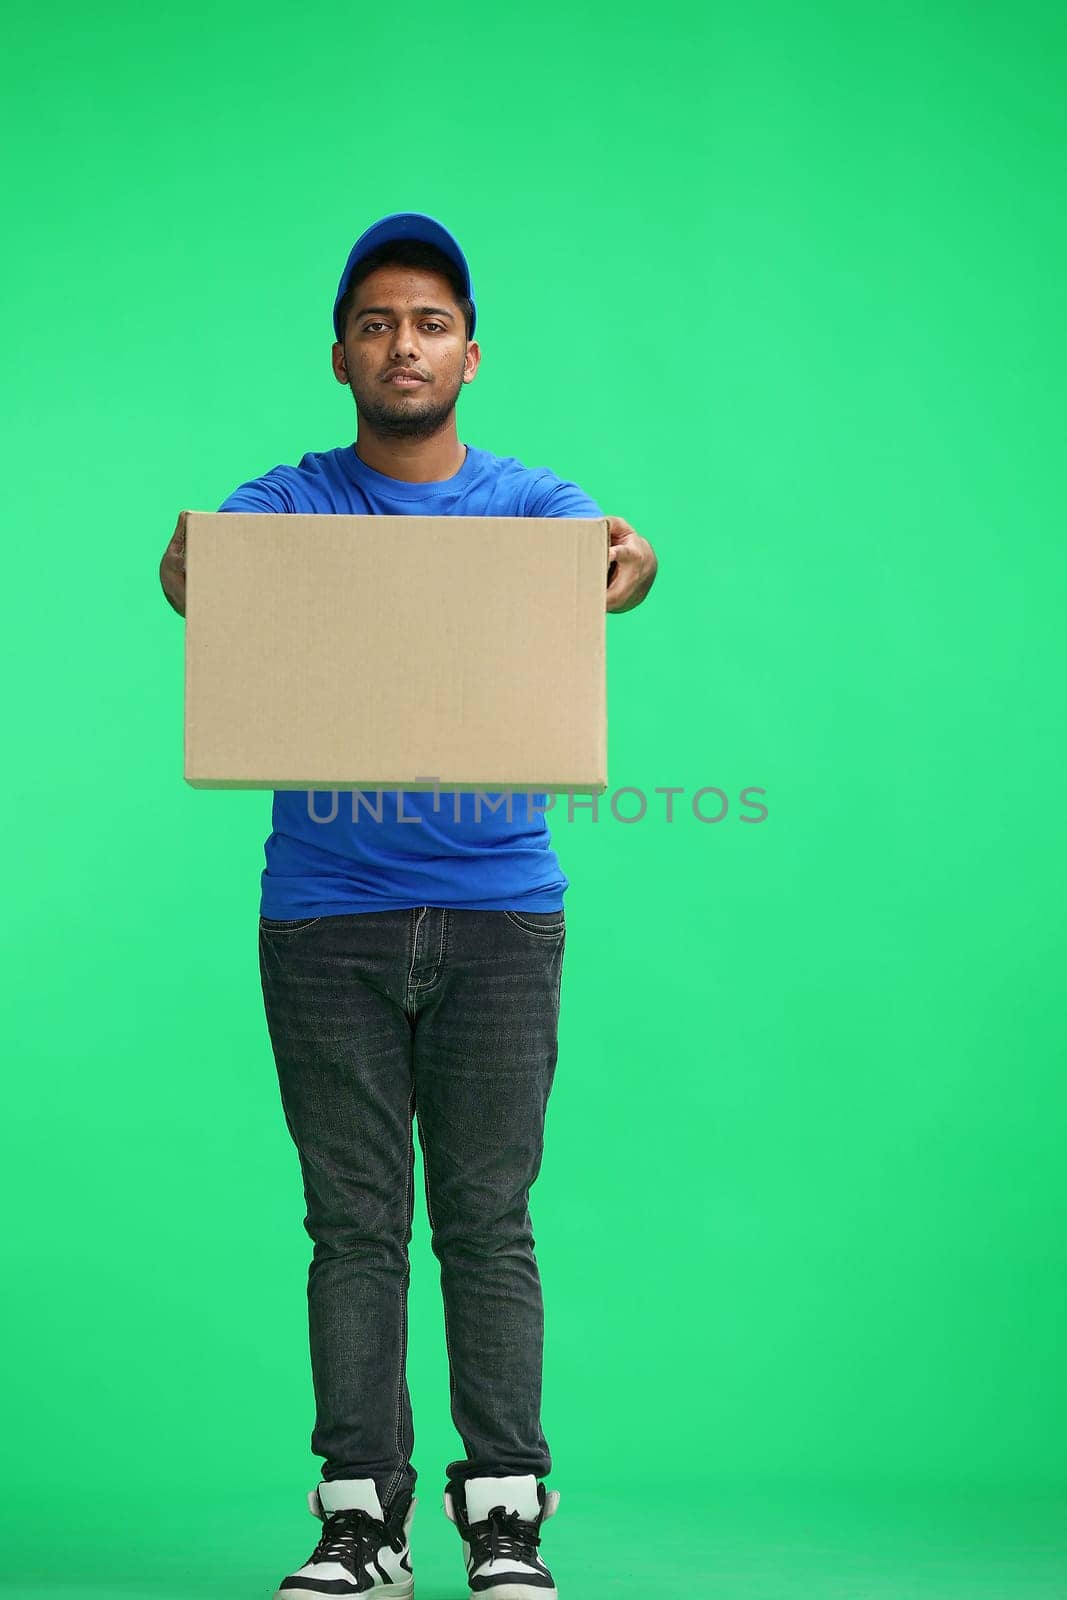 A man on a green background give box.